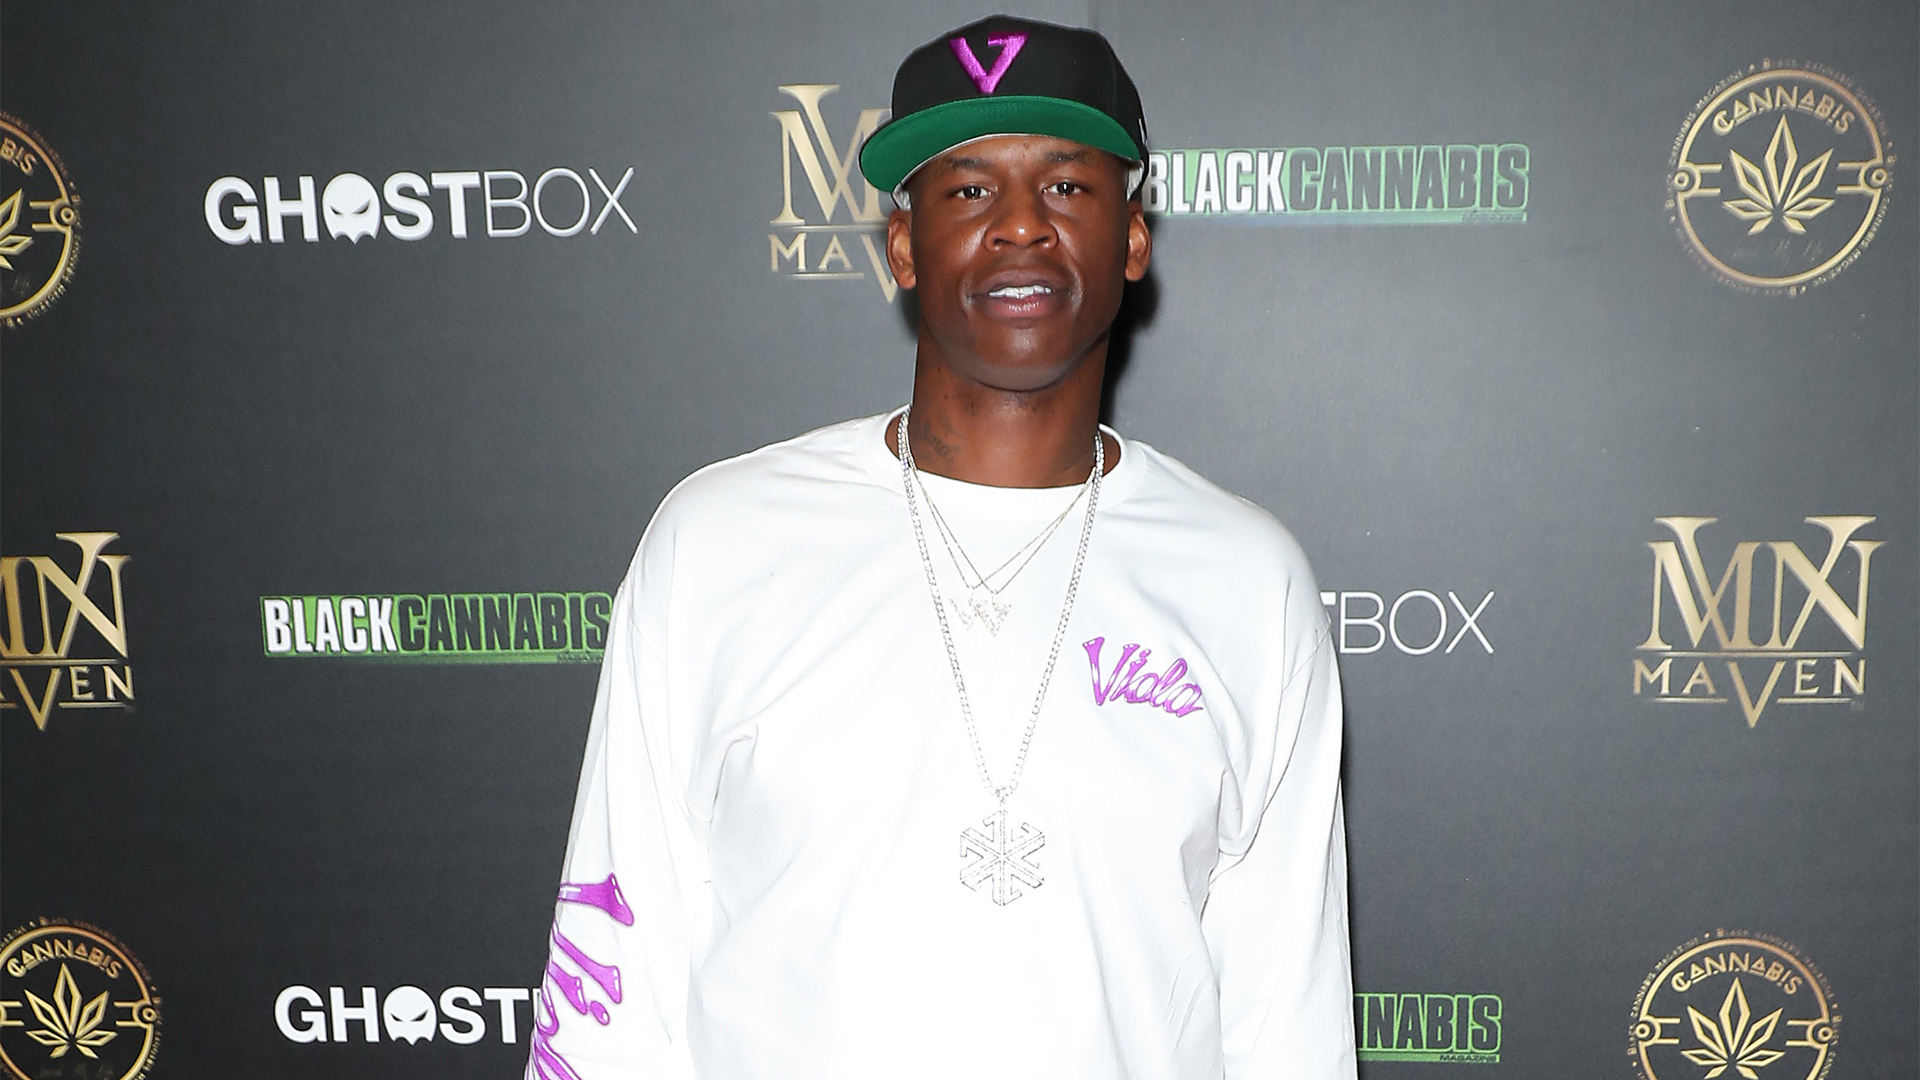 How Village, A Cannabis Brand Backed By Al Harrington & Other Black Investors, Plans To Diversify The Industry